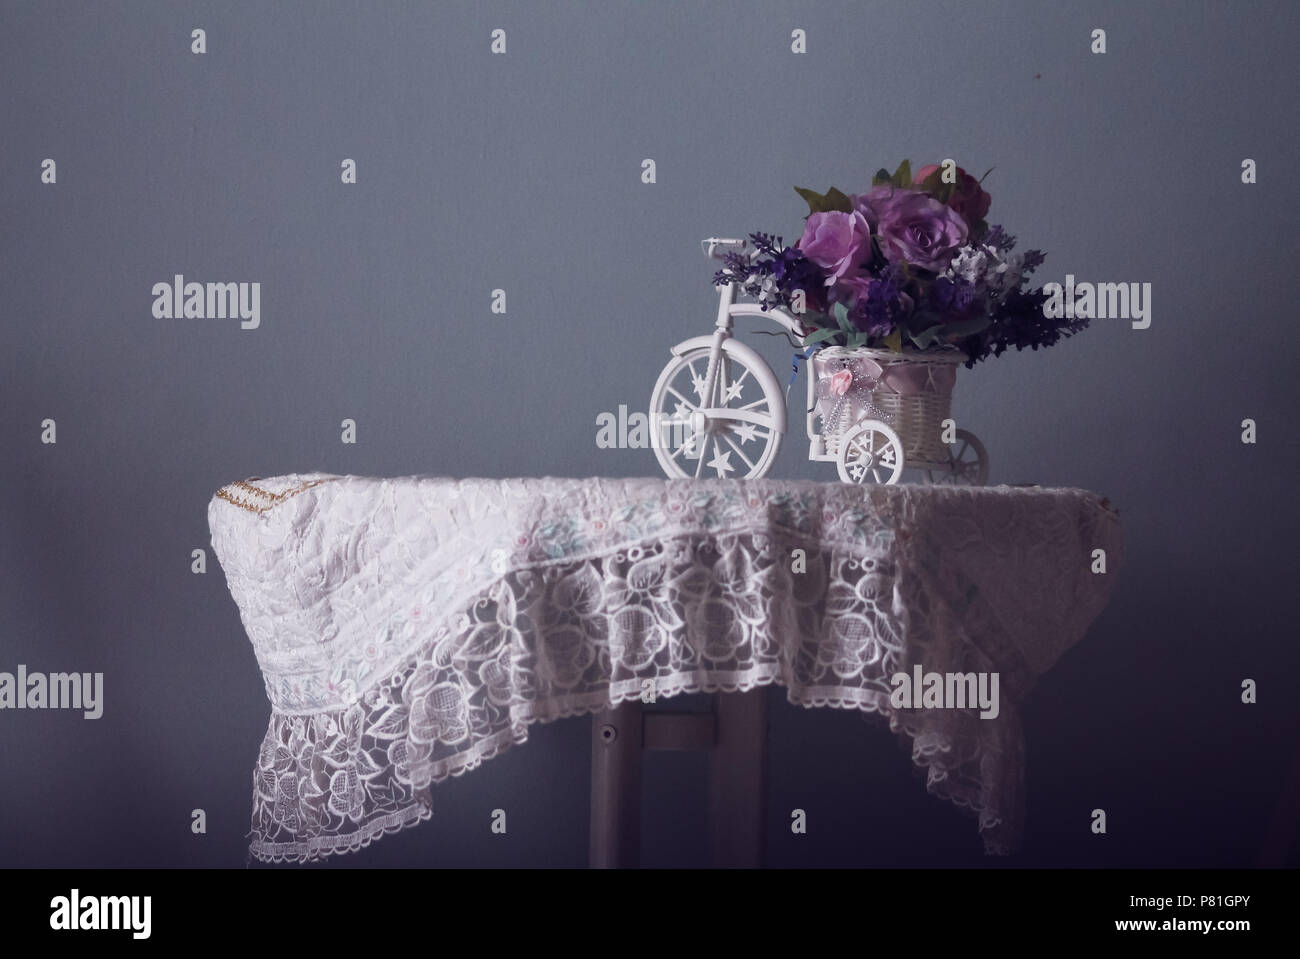 Conceptual still life of a table with lace cover and a vintage table top showing a calm winter aesthetic Stock Photo